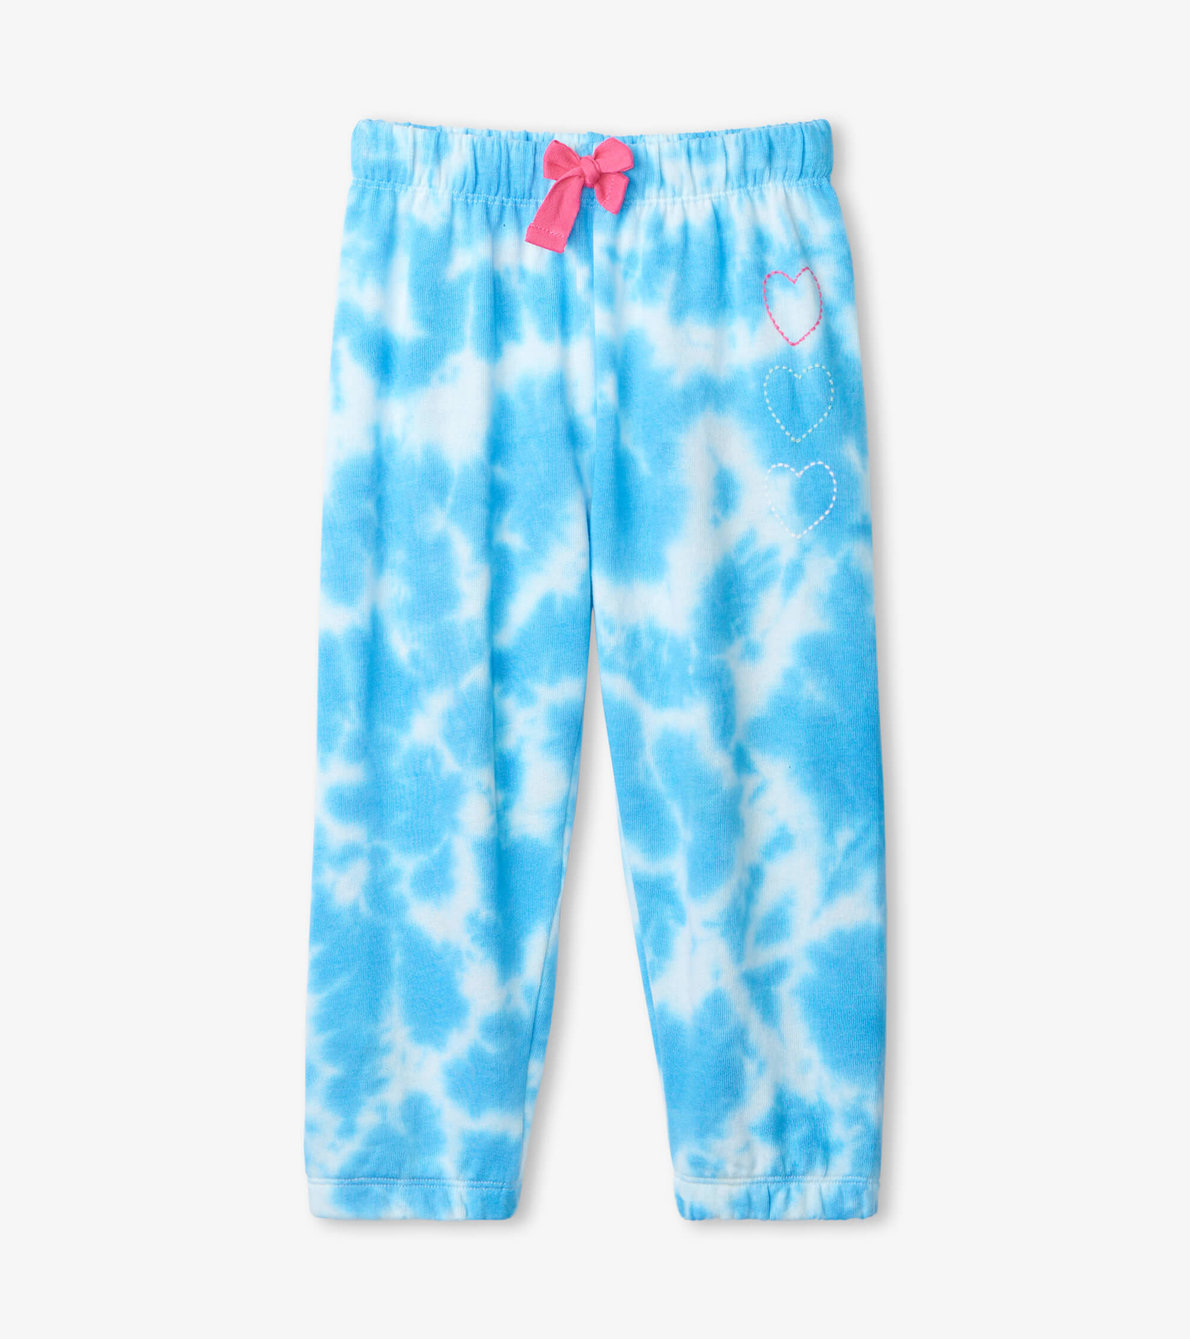 View larger image of Blue Sky Tie Dye Relaxed Fit Joggers